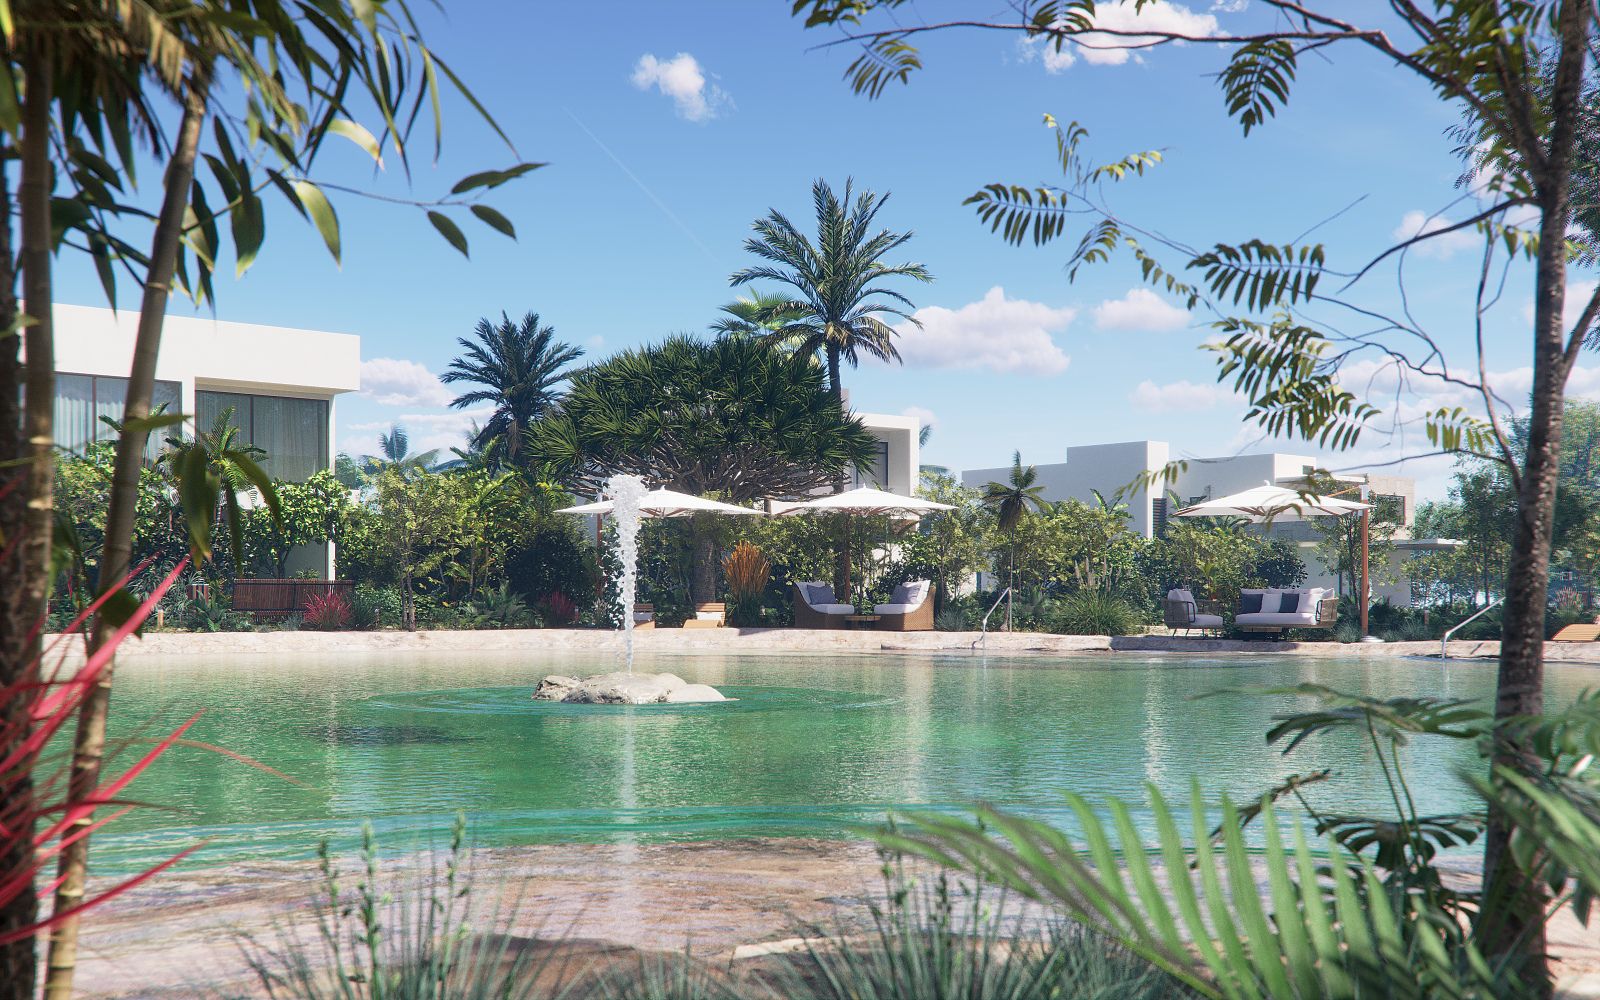 Land for sale in Playacar, common area with pool, in gated community with golf course and access to beach club.